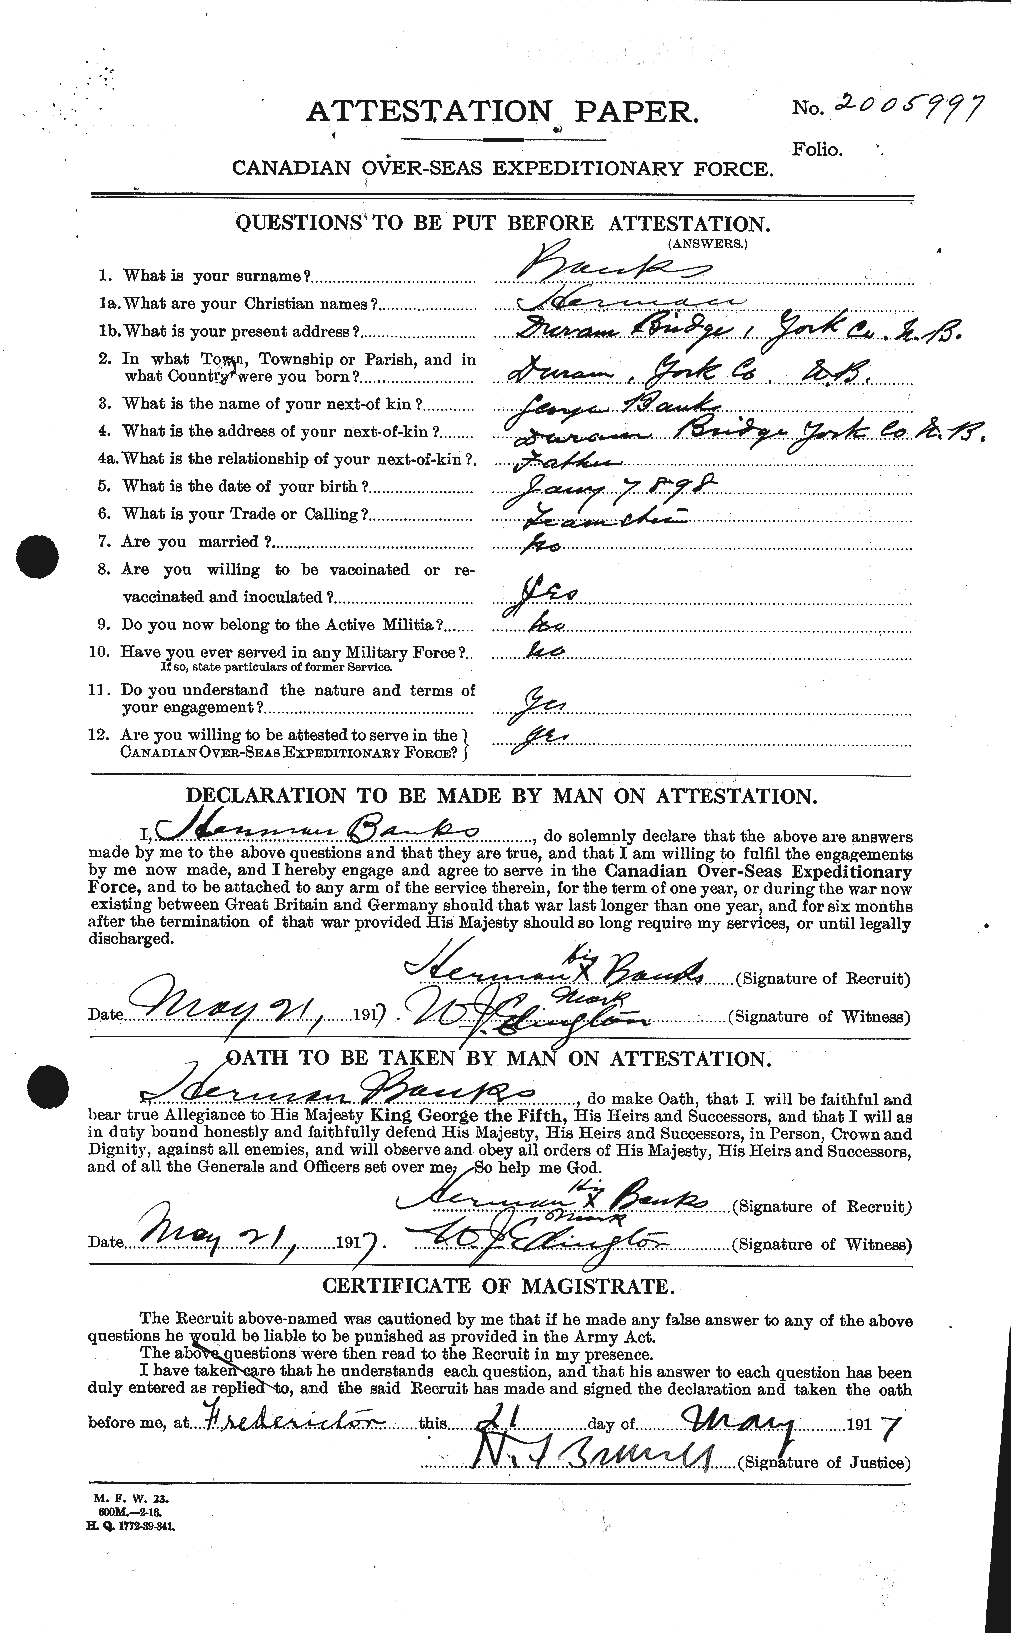 Personnel Records of the First World War - CEF 219194a